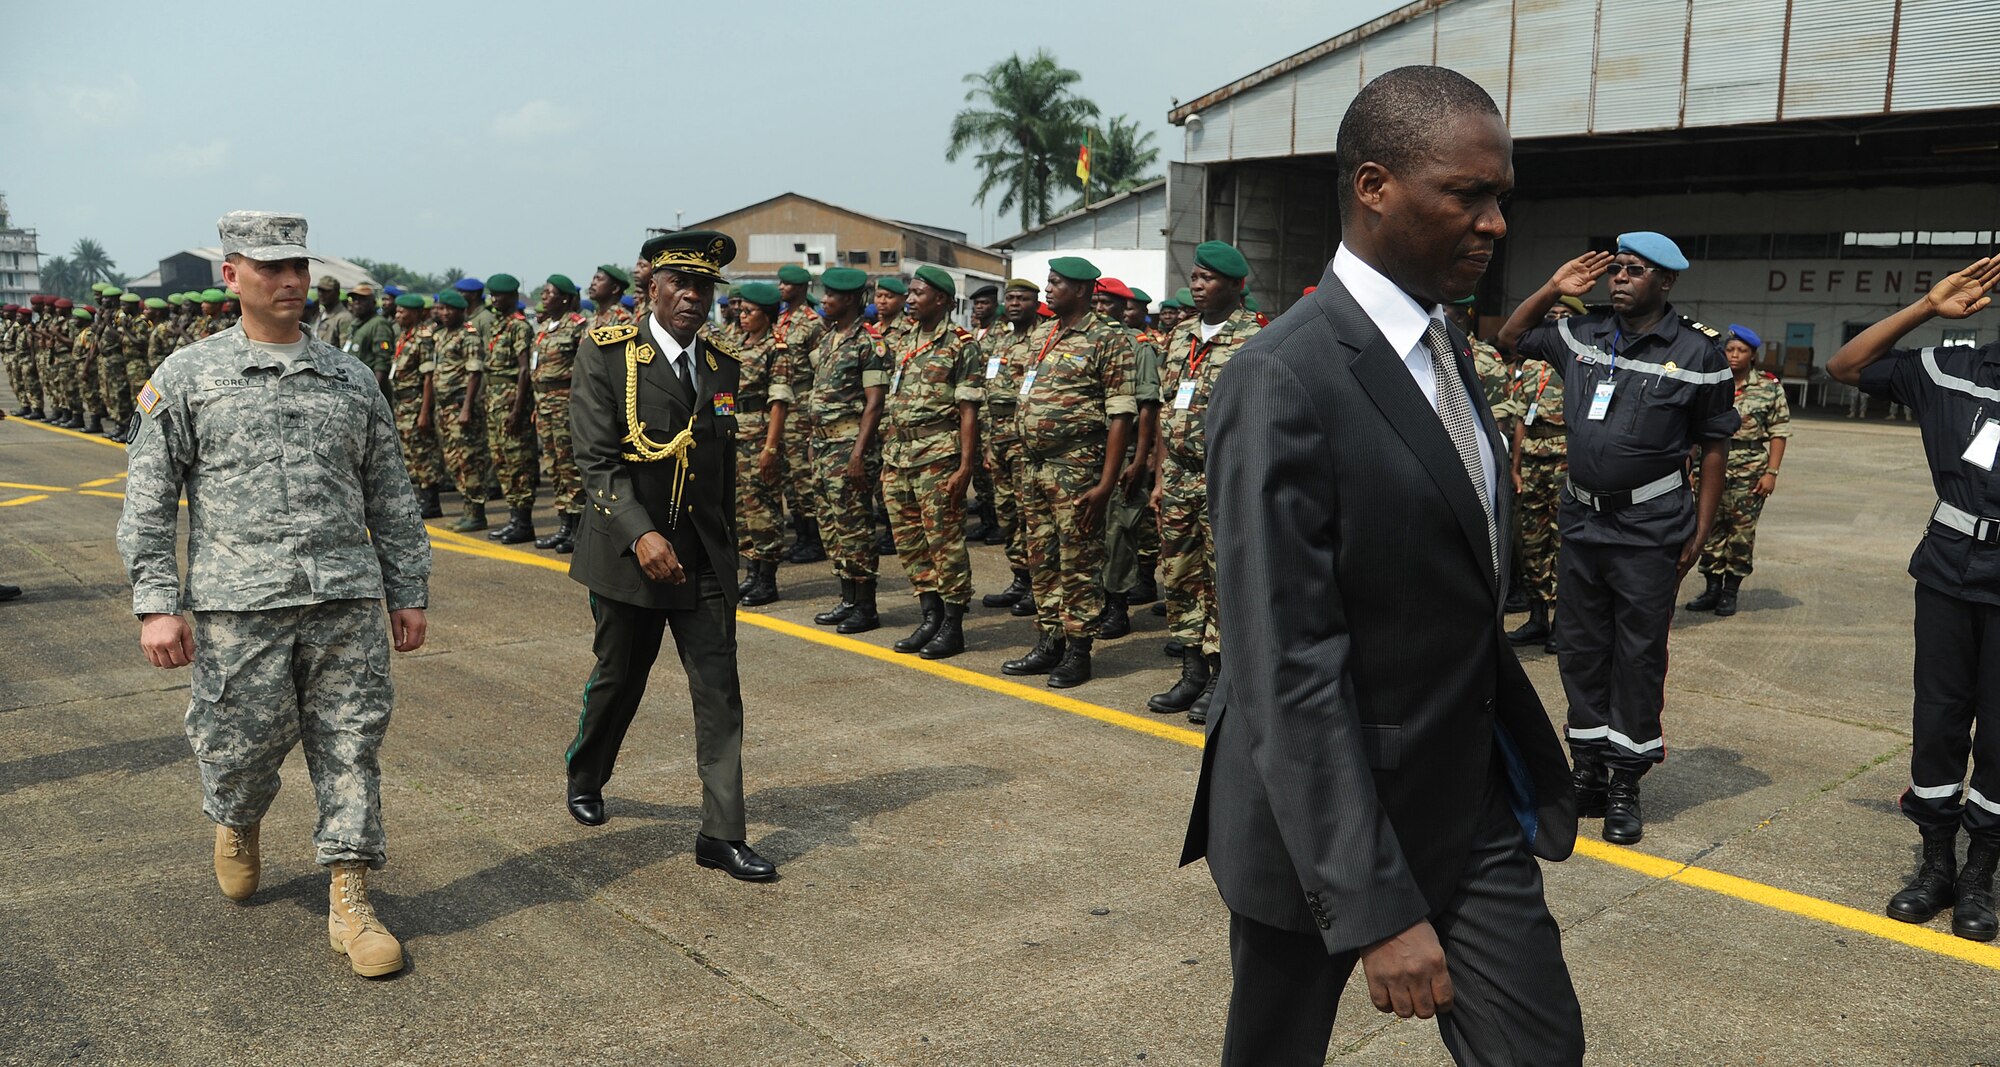 DOUALA, CAMEROON –  U.S. Army Brig. Gen. Peter Corey, U.S. Army Africa deputy commanding general and senior U.S. Army exercise official, is led by Joseph Beti Assomo, governor of the Littoral Region, as they conduct a pass in review exercise of participants during the opening ceremony for Central Accord 13, at Douala Air Force Base, Douala, Cameroon, Feb. 20, 2013. Central Accord 2013 is a joint exercise in which U.S., Cameroon and neighboring Central African militaries partner to promote regional cooperation while and increasing aerial resupply and medical readiness capacity. (Photo by Master Sgt. MSgt Stan Parker, 621st CRW Public Affairs)